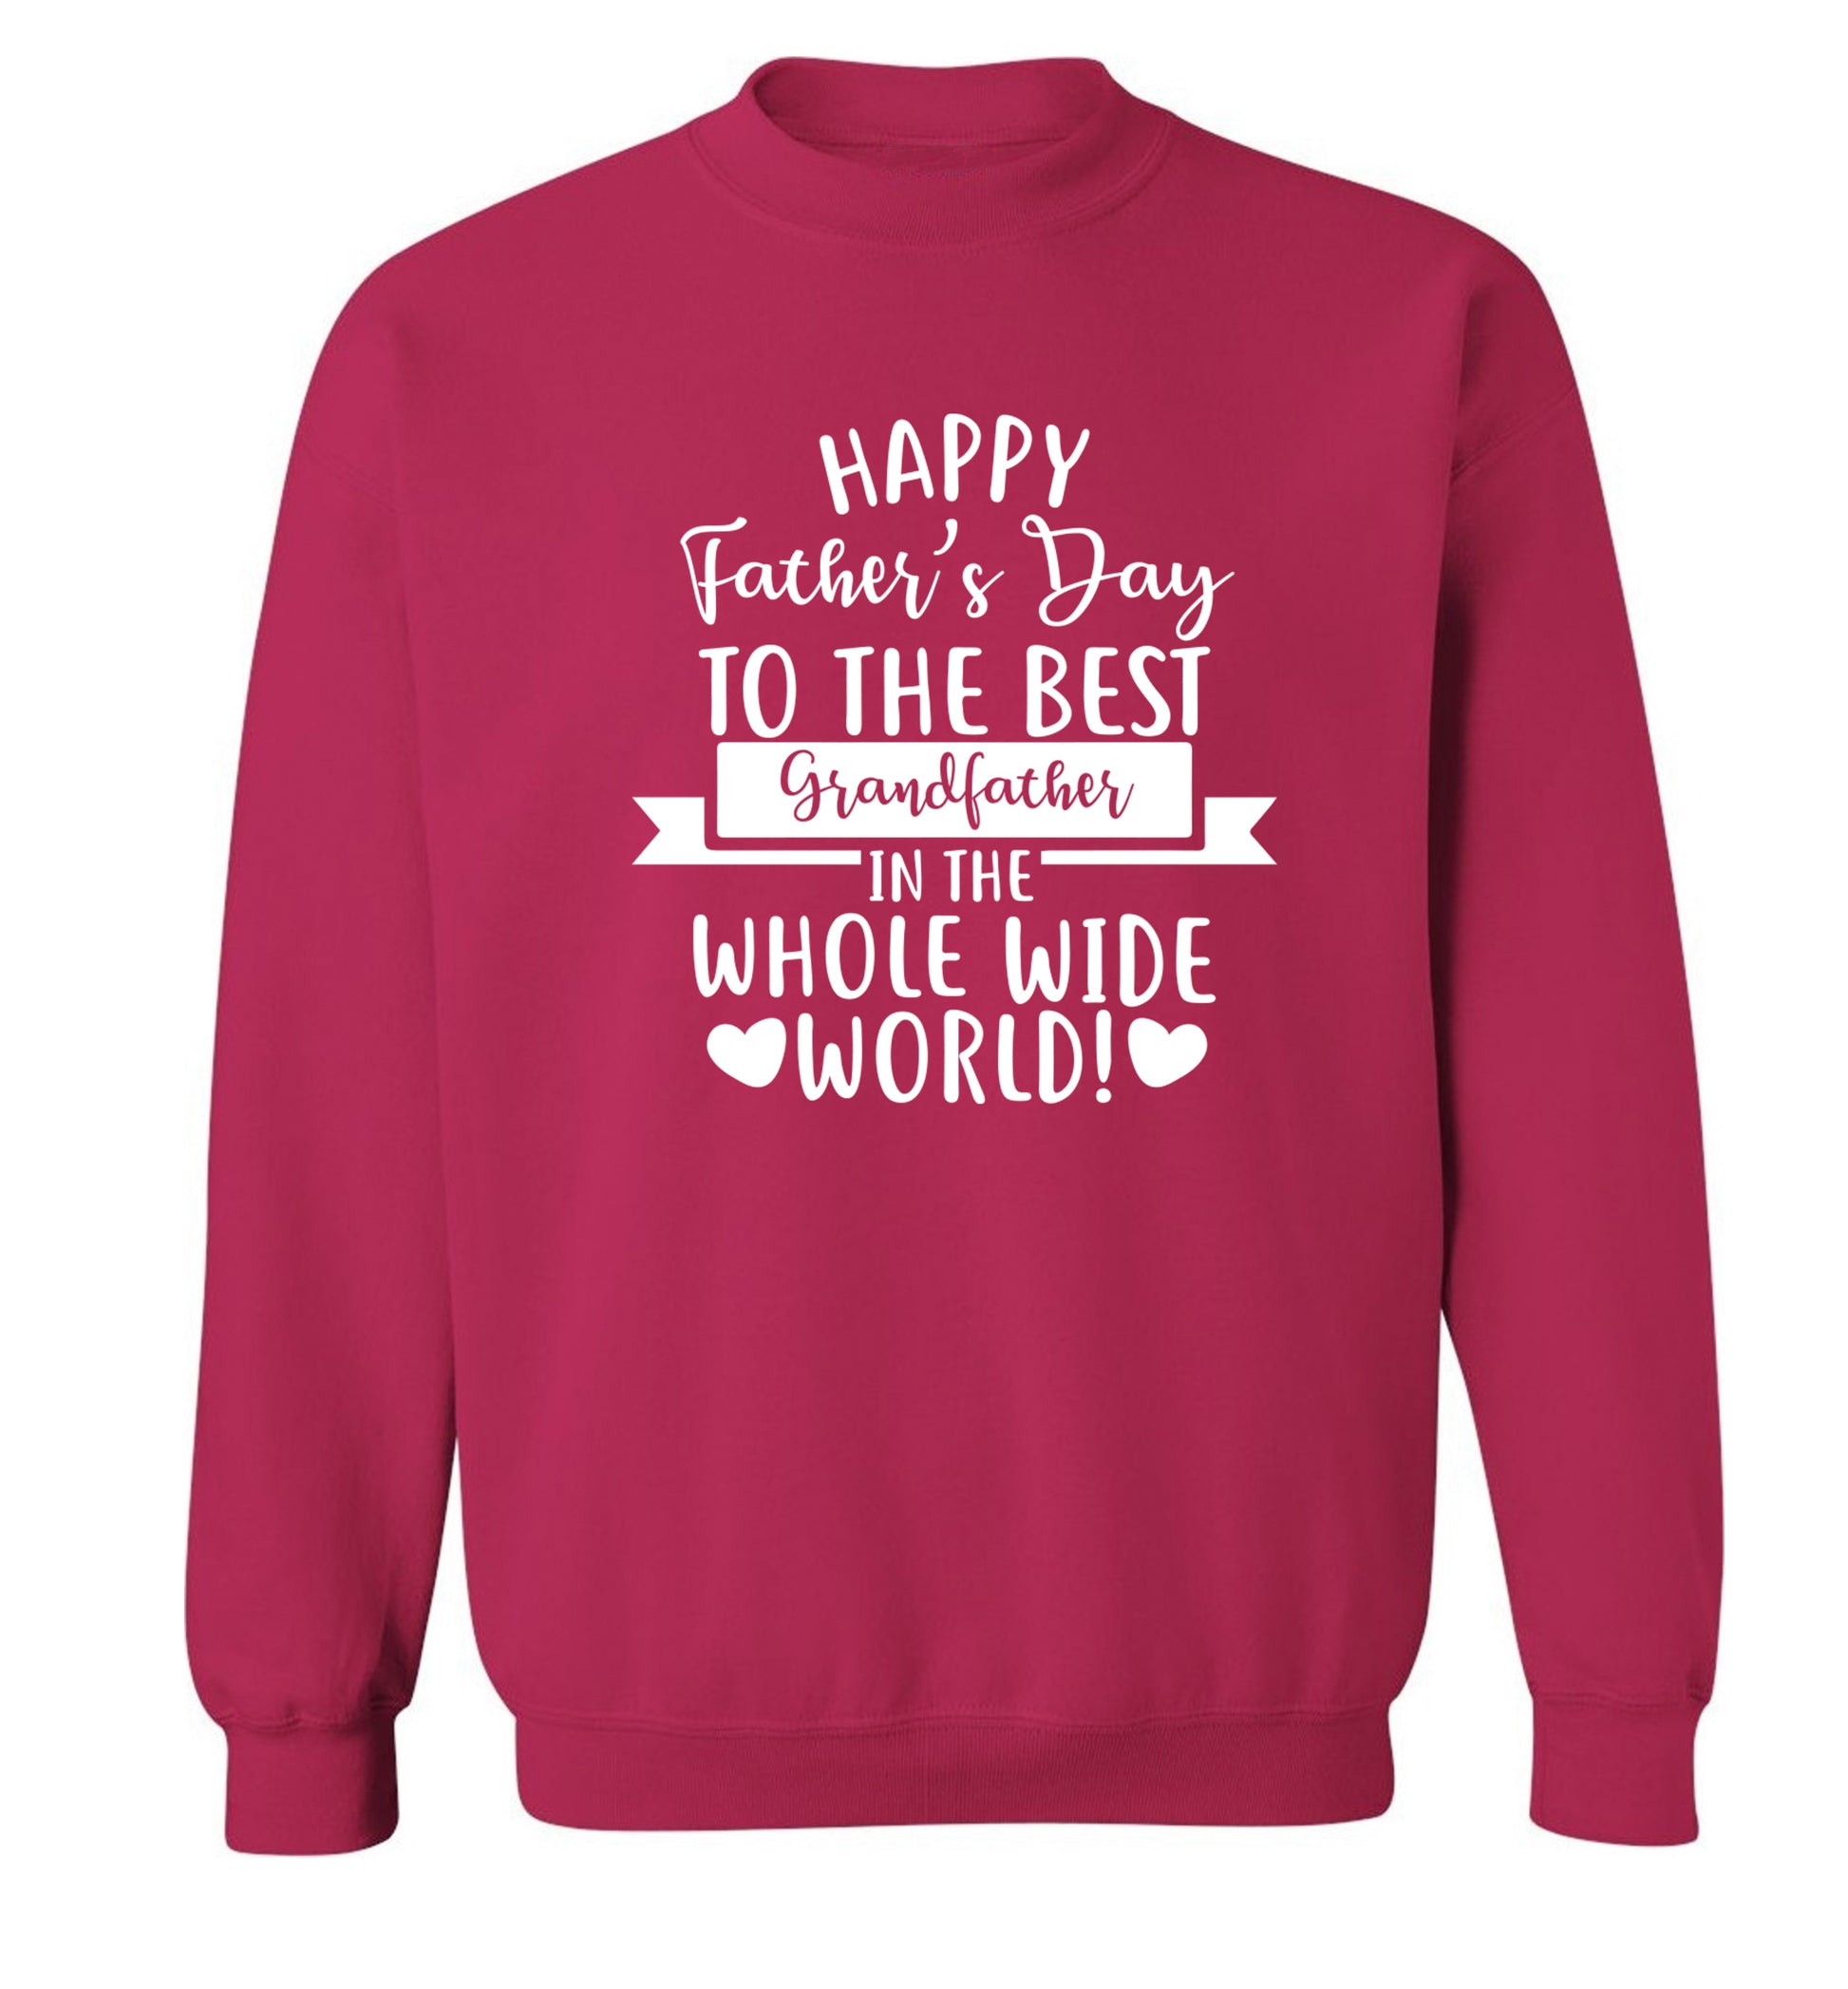 Happy Father's Day to the best grandfather in the world Adult's unisex pink Sweater 2XL